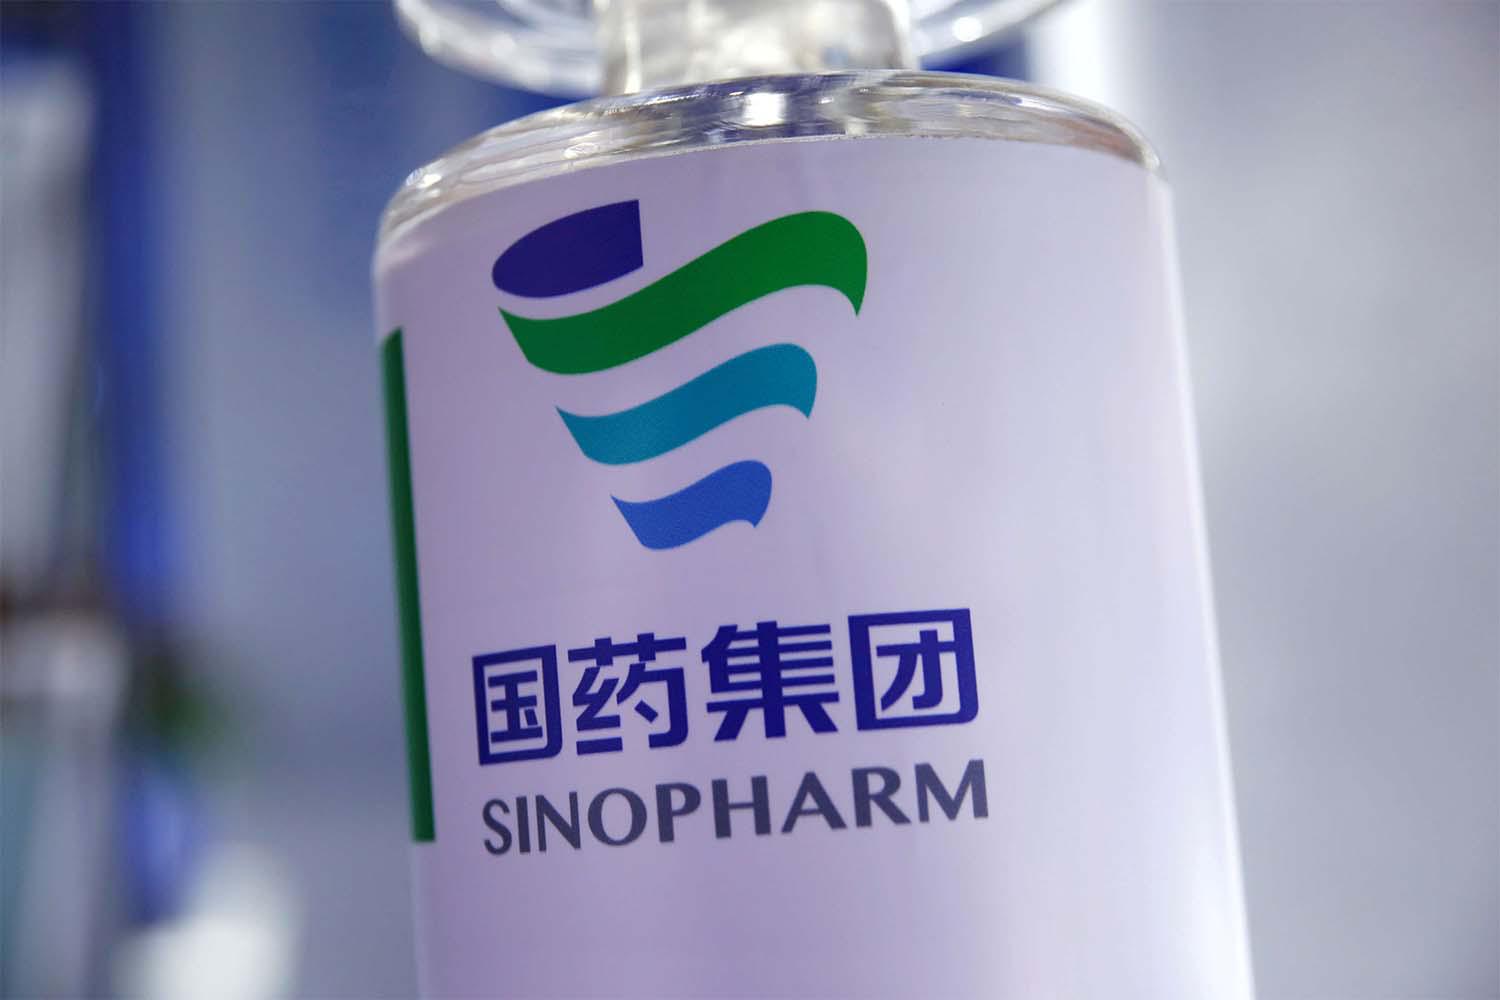 Sothema will soon start production of 5 million doses a month of Sinopharm COVID-19 vaccine 